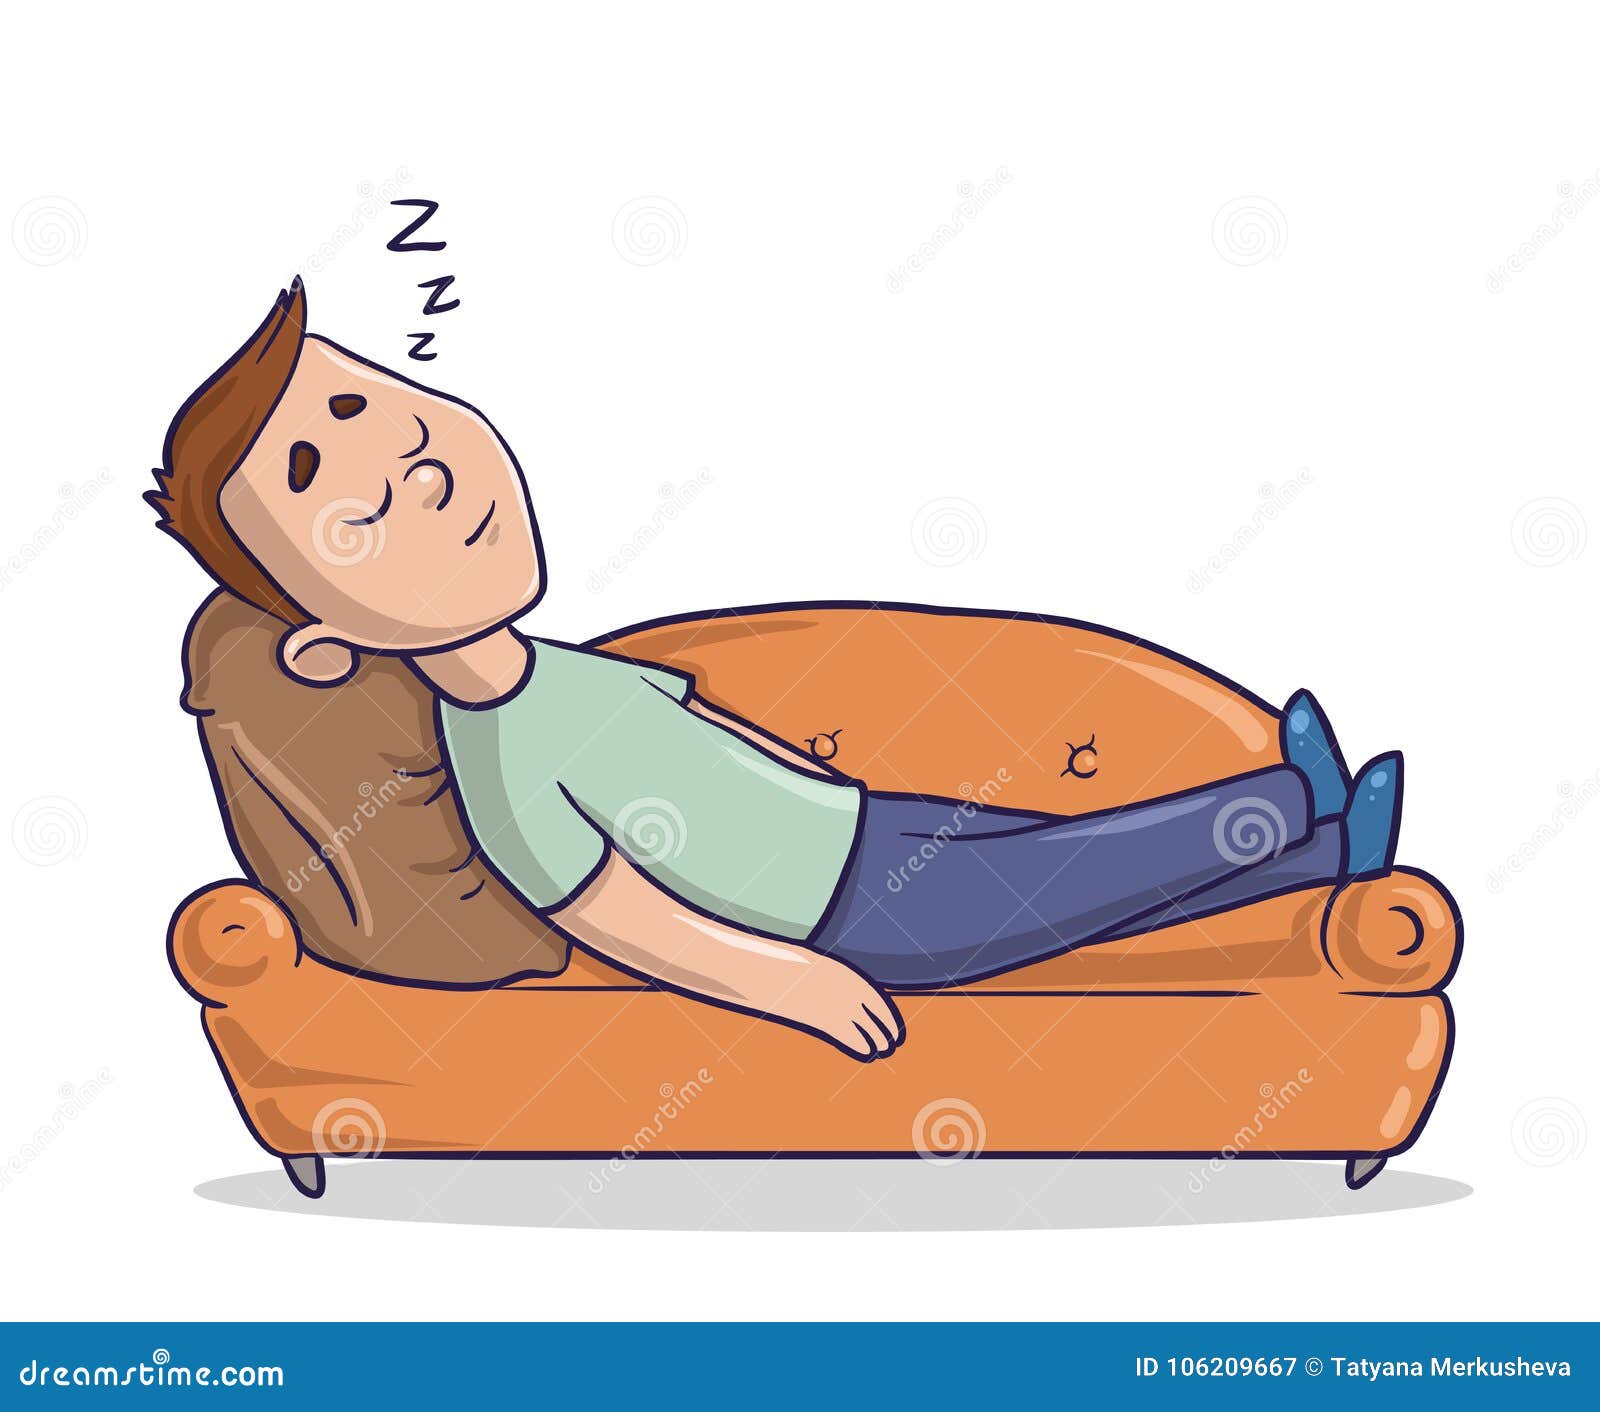 young man lying on a sandy-colored couch takes a nap. guy sleeping on a sofa. cartoon character  